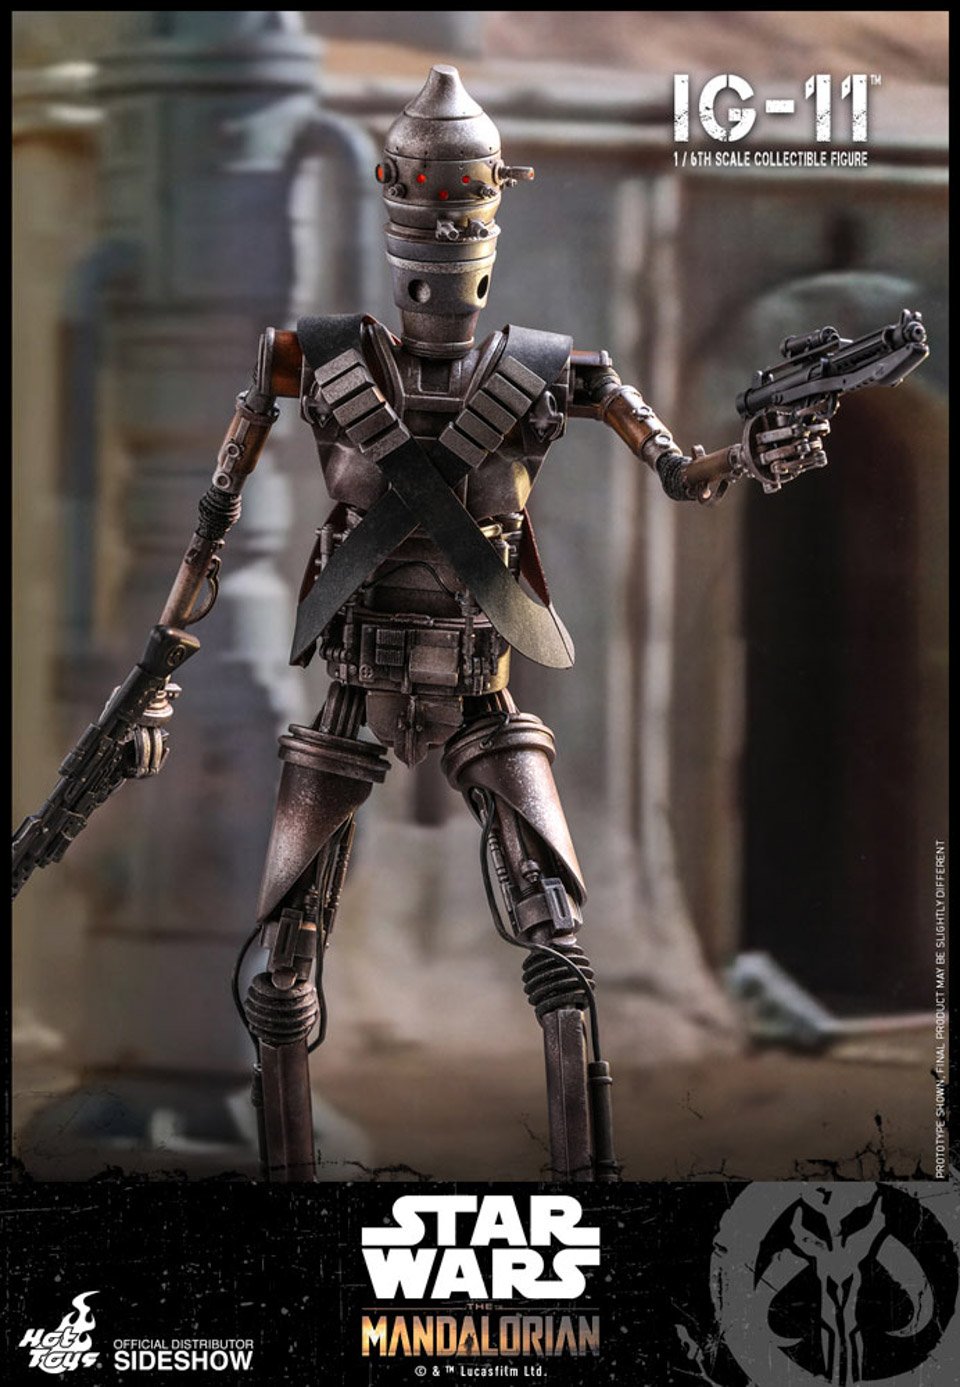 Hot Toys' Mandalorian IG-11 Bounty Droid Collectible Figure Is Ready to